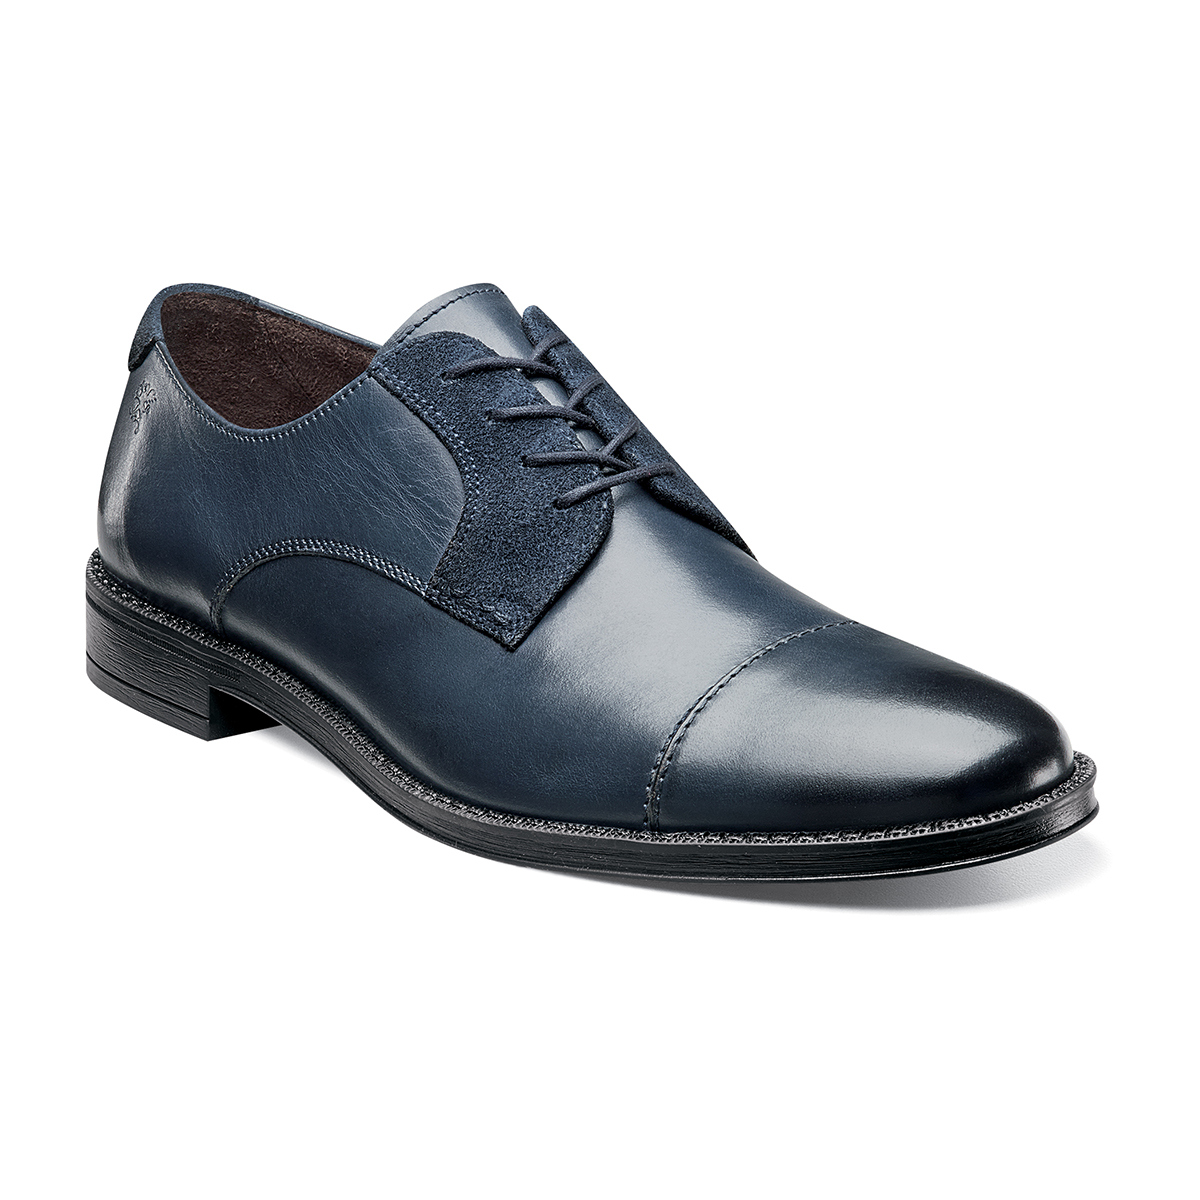 Men's RELAXED Shoes | Navy Cap Toe Oxford | Stacy Adams Caldwell